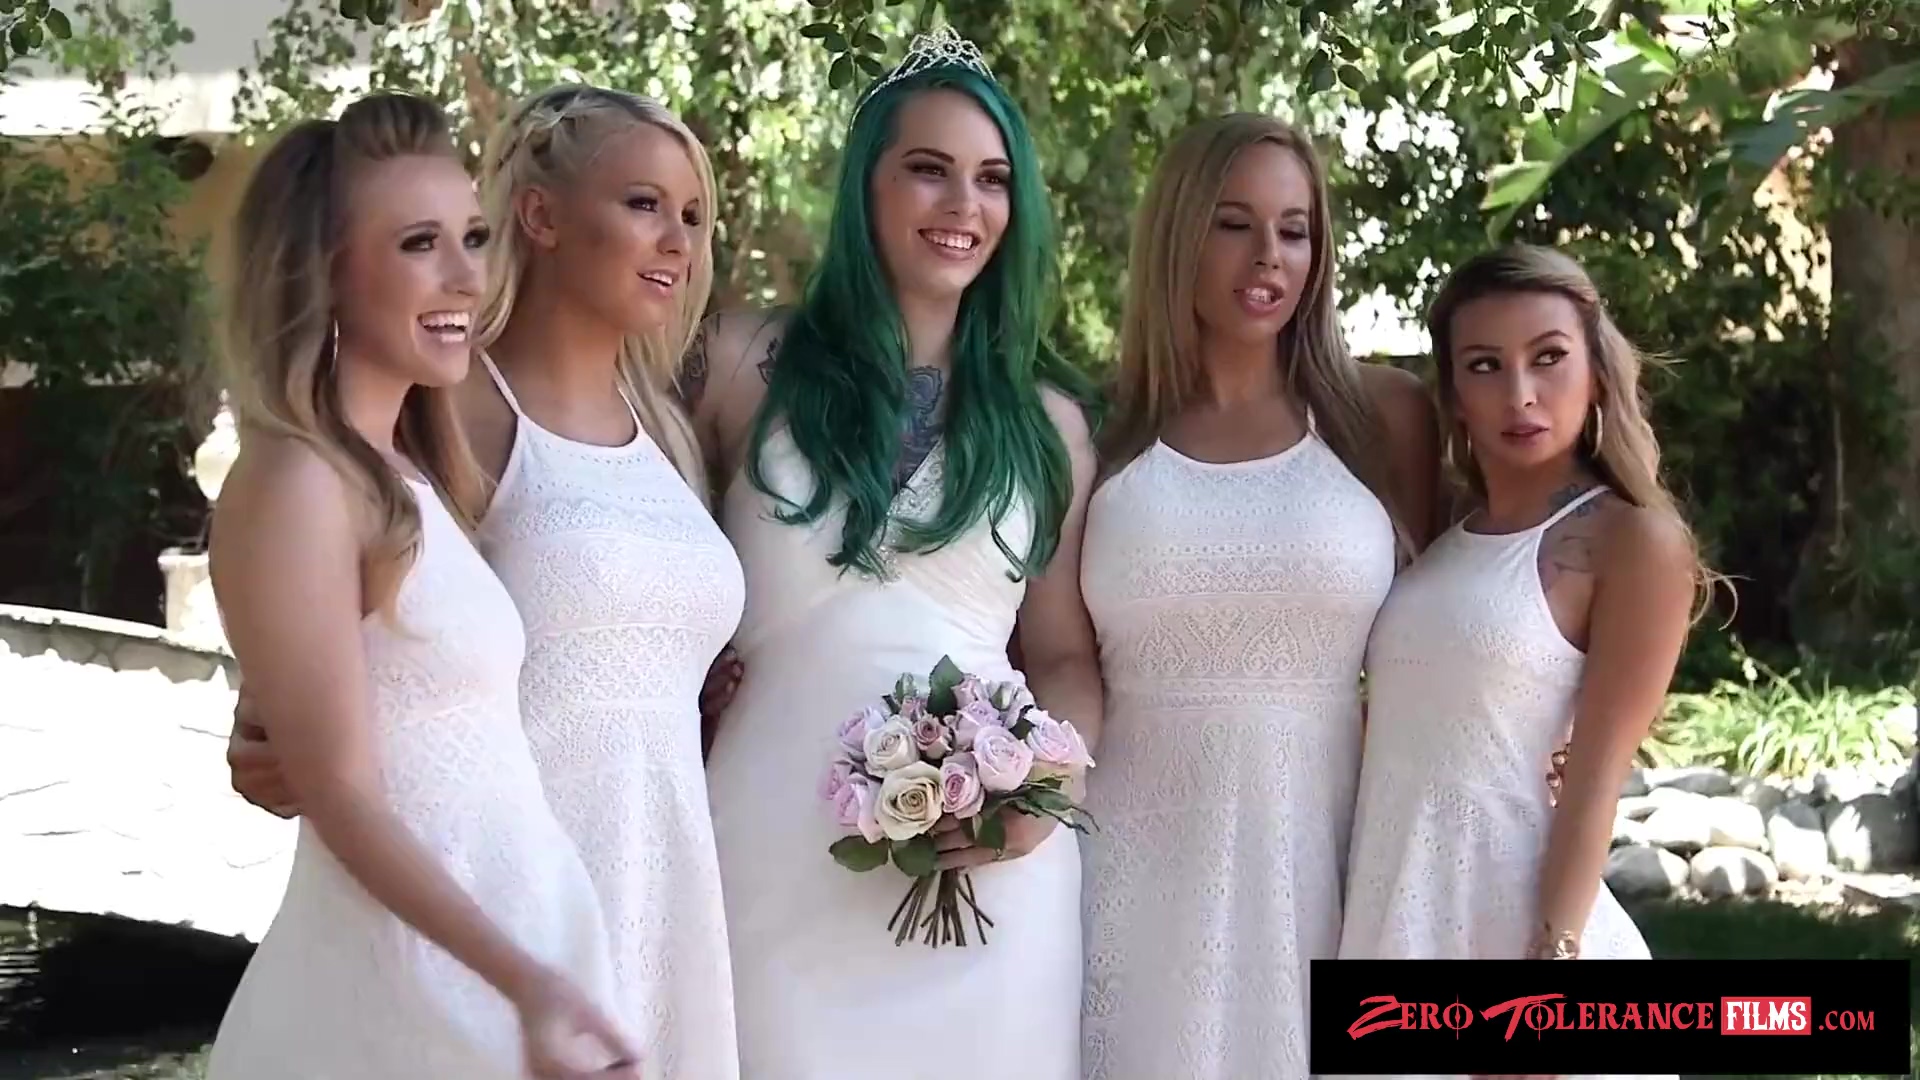 Russian Wedding Orgy - Real wedding orgy of perverted bride, groom and their friends